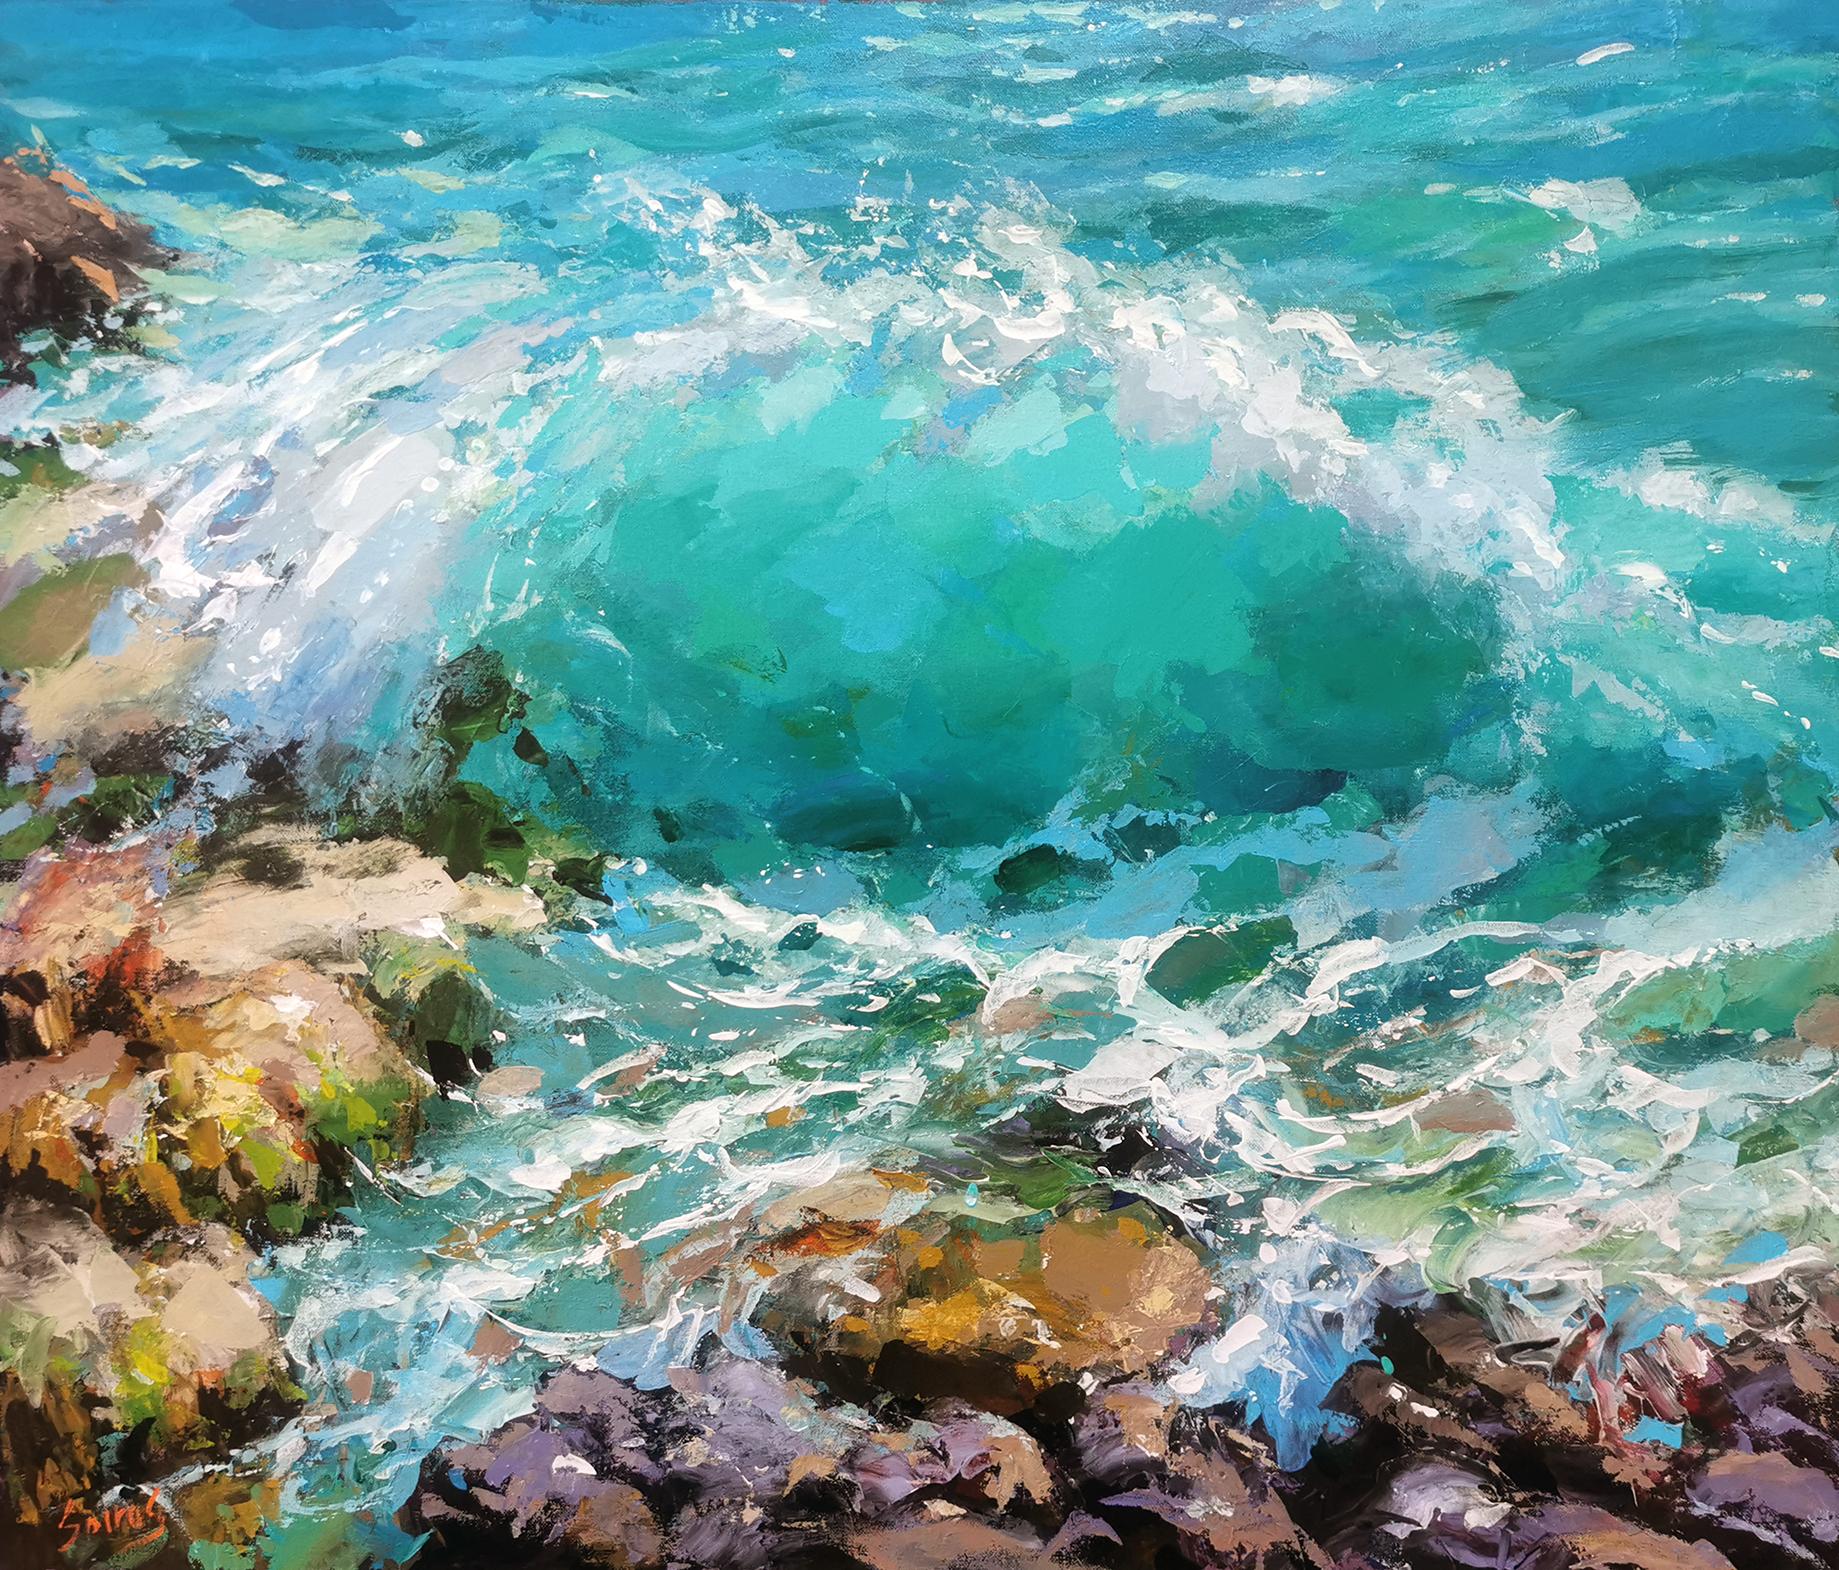 Caribbean waves at noon 2 - Impressionism 
oil. acr.  CANVAS,,
69 cm x 61 cm, 27